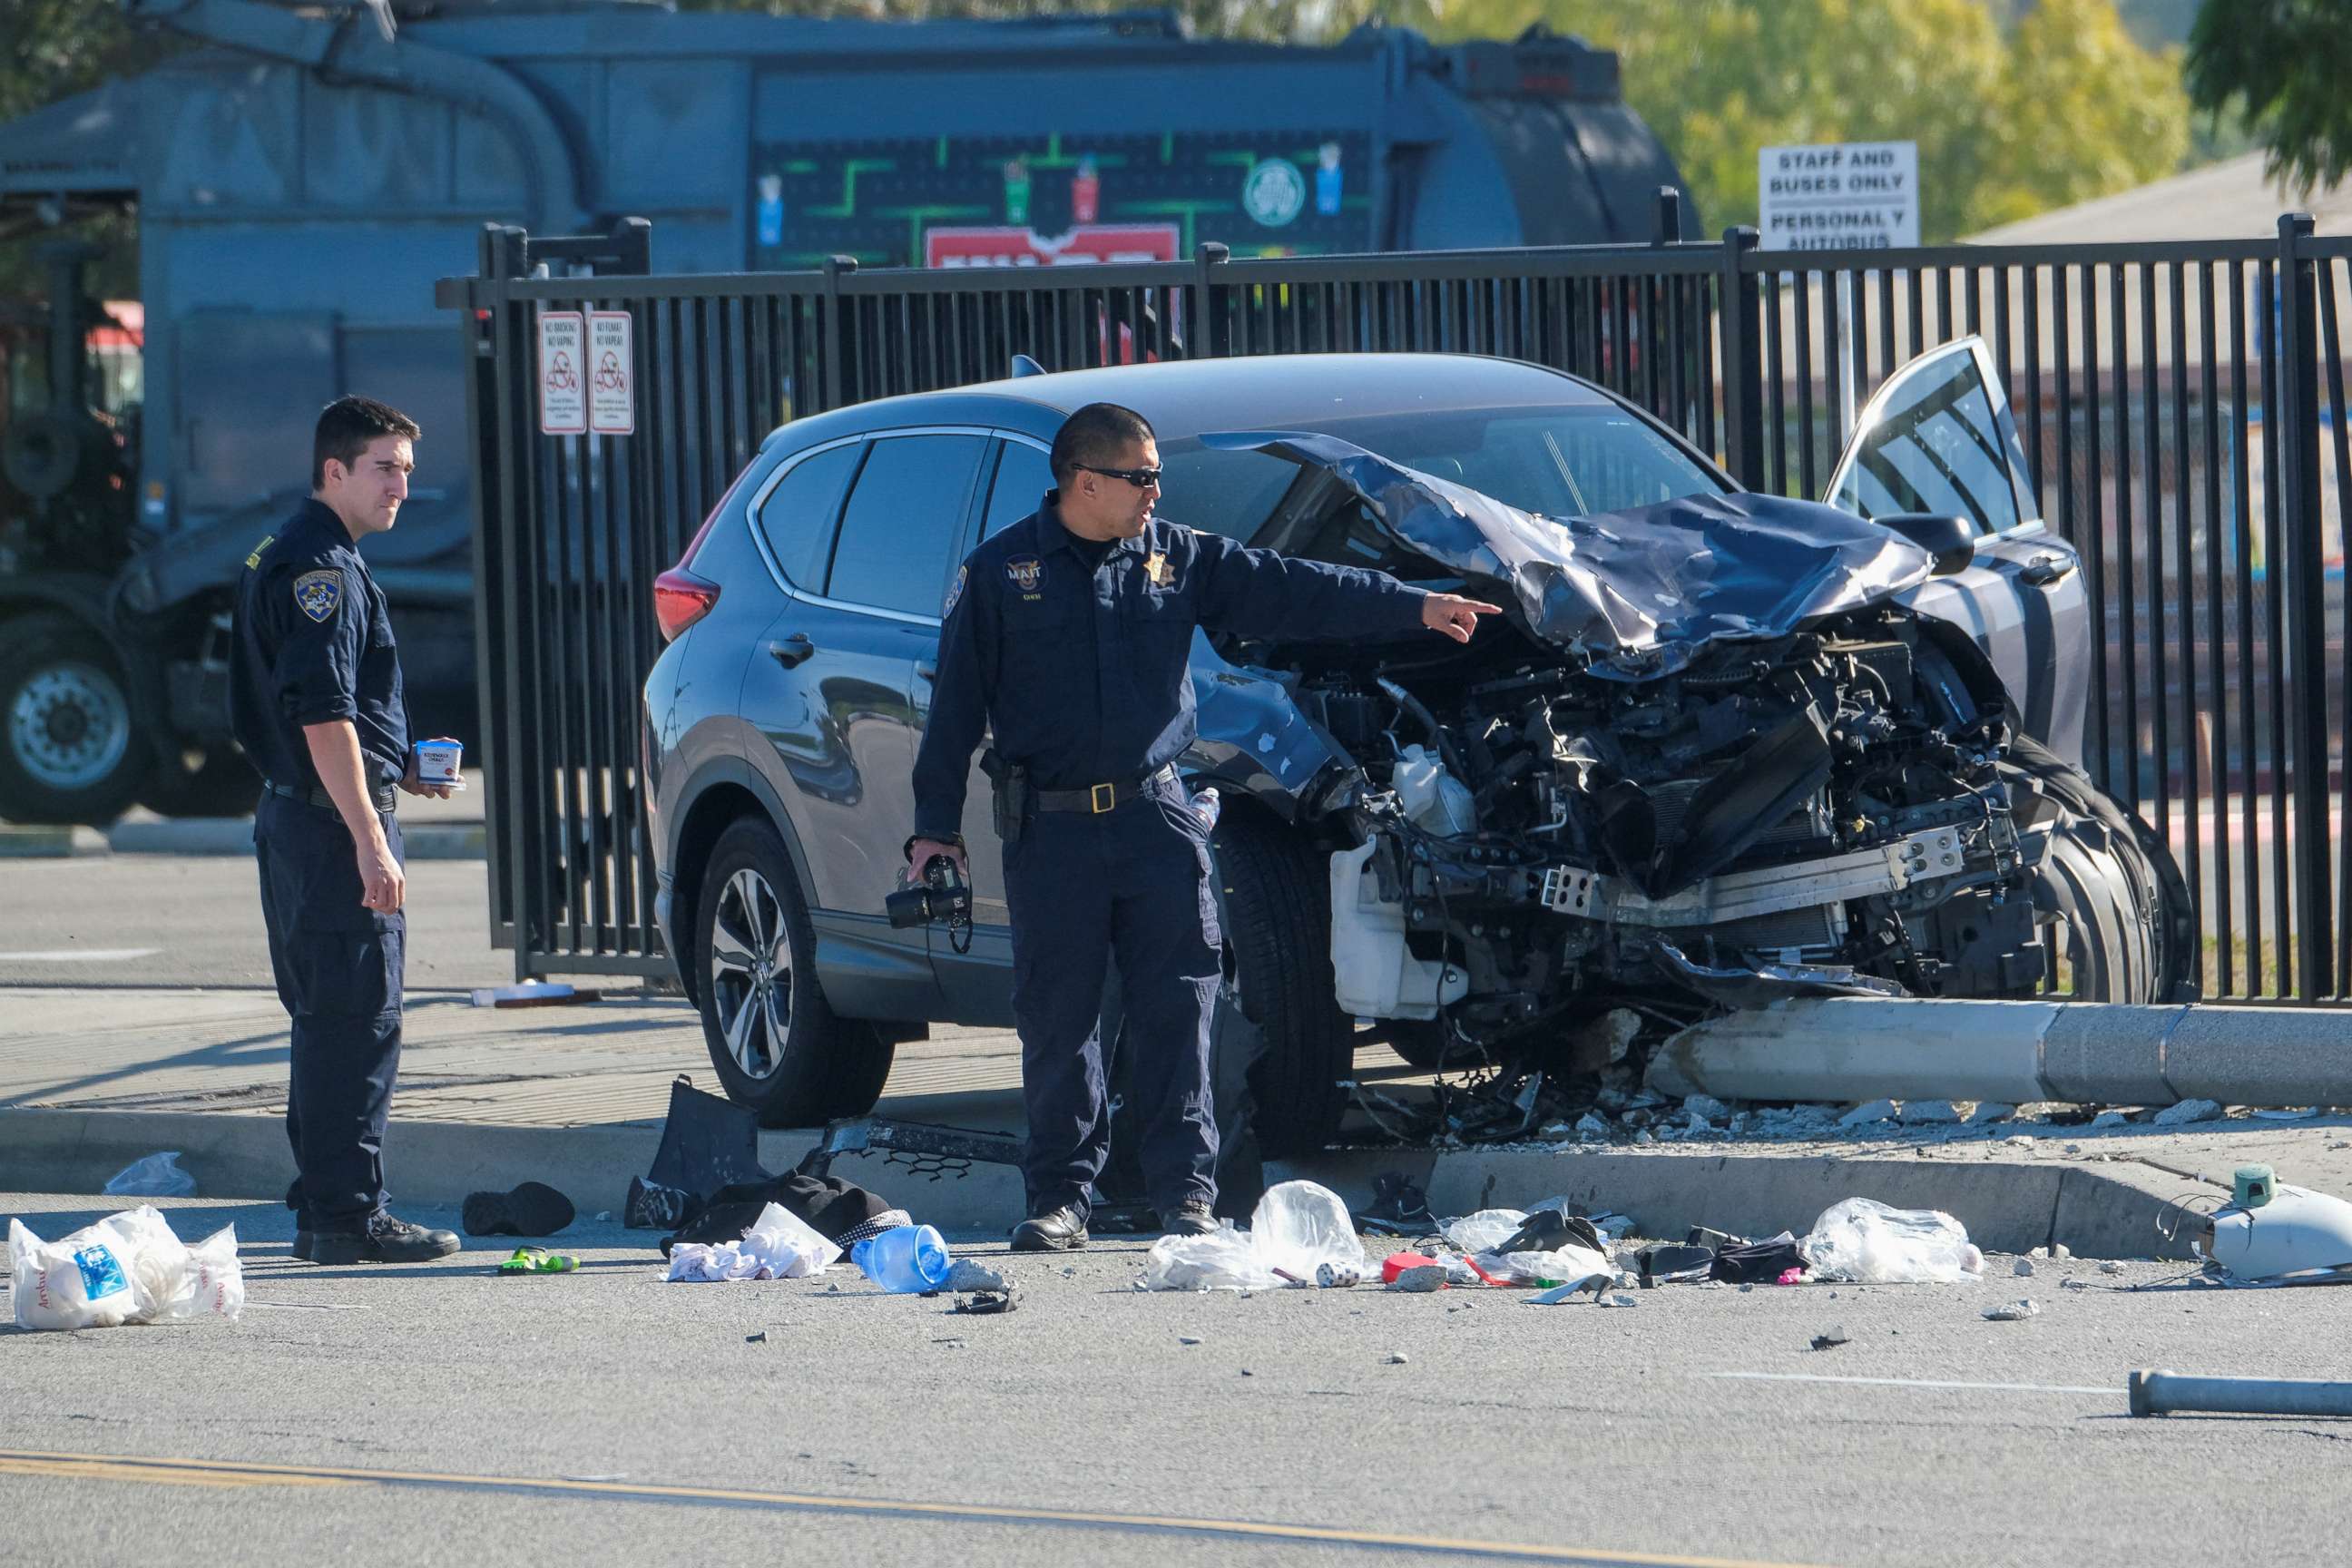 PHOTO: In this Nov. 16, 2022, file photo, law enforcement investigate the scene after multiple Los Angeles County Sheriff's Department recruits were injured when a car crashed into them while they were out for a run in Whittier, Calif.